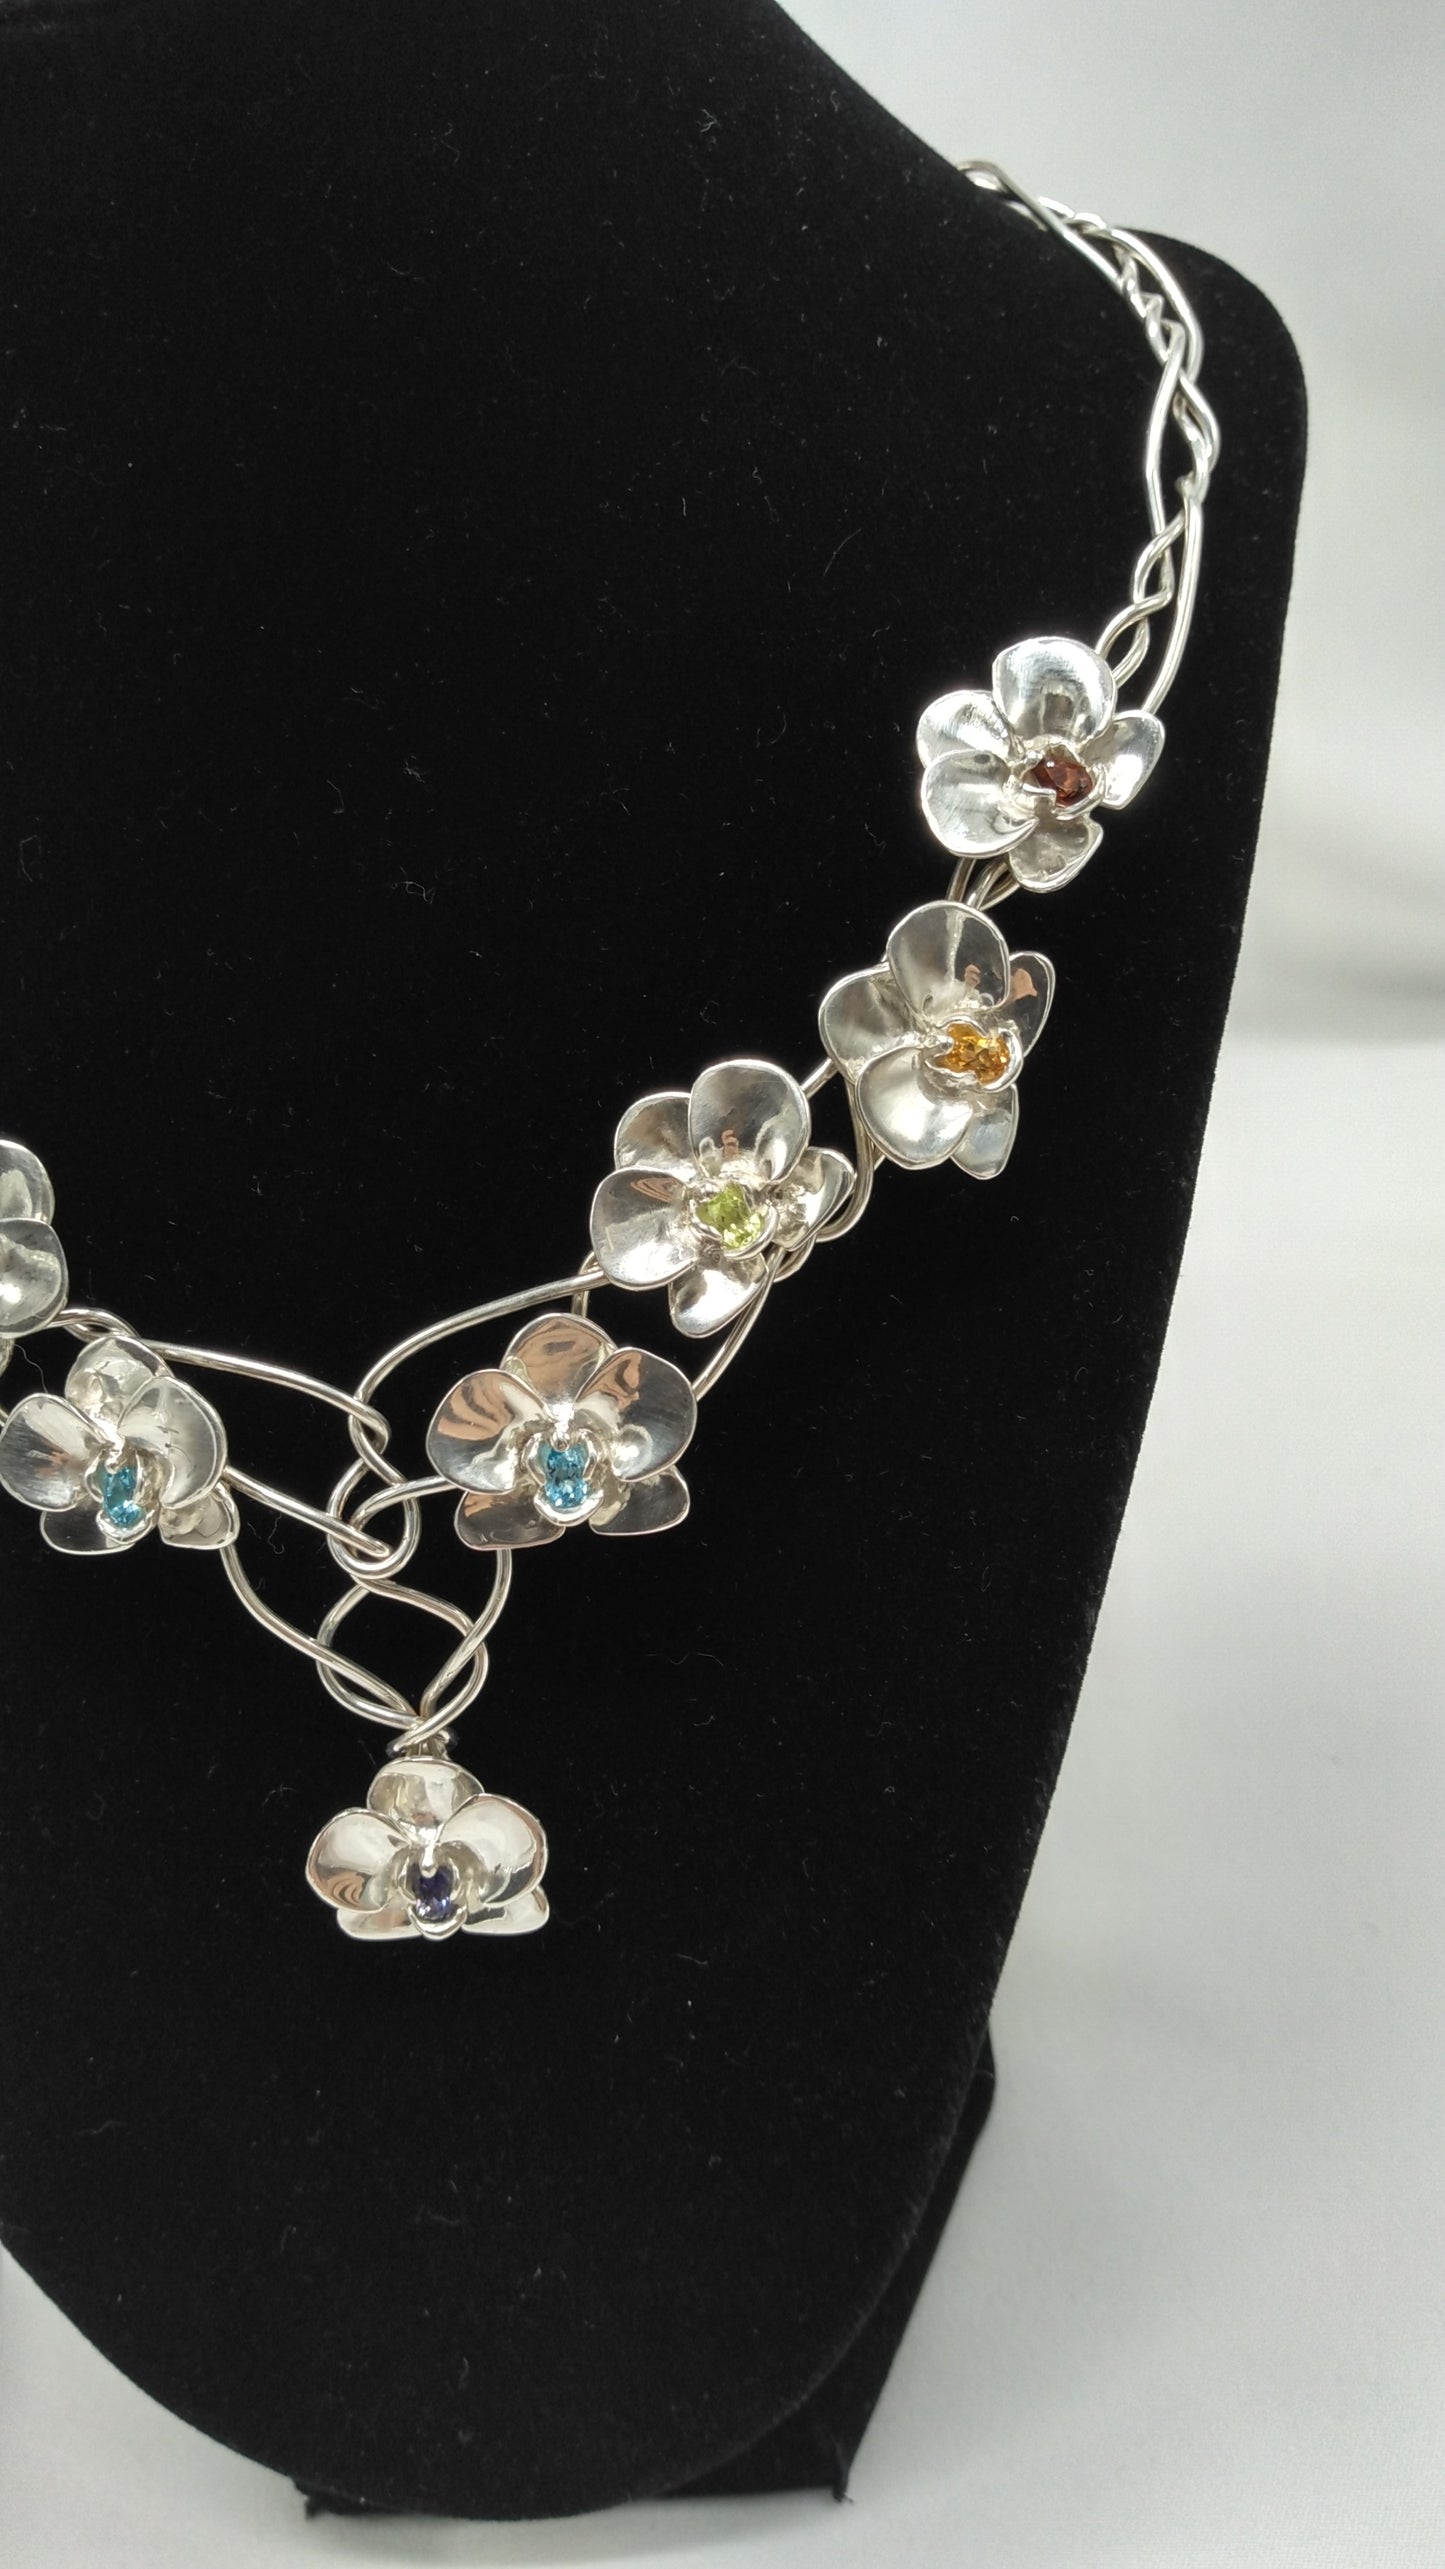 Twisted Silver Orchid Necklace with Colored Stones